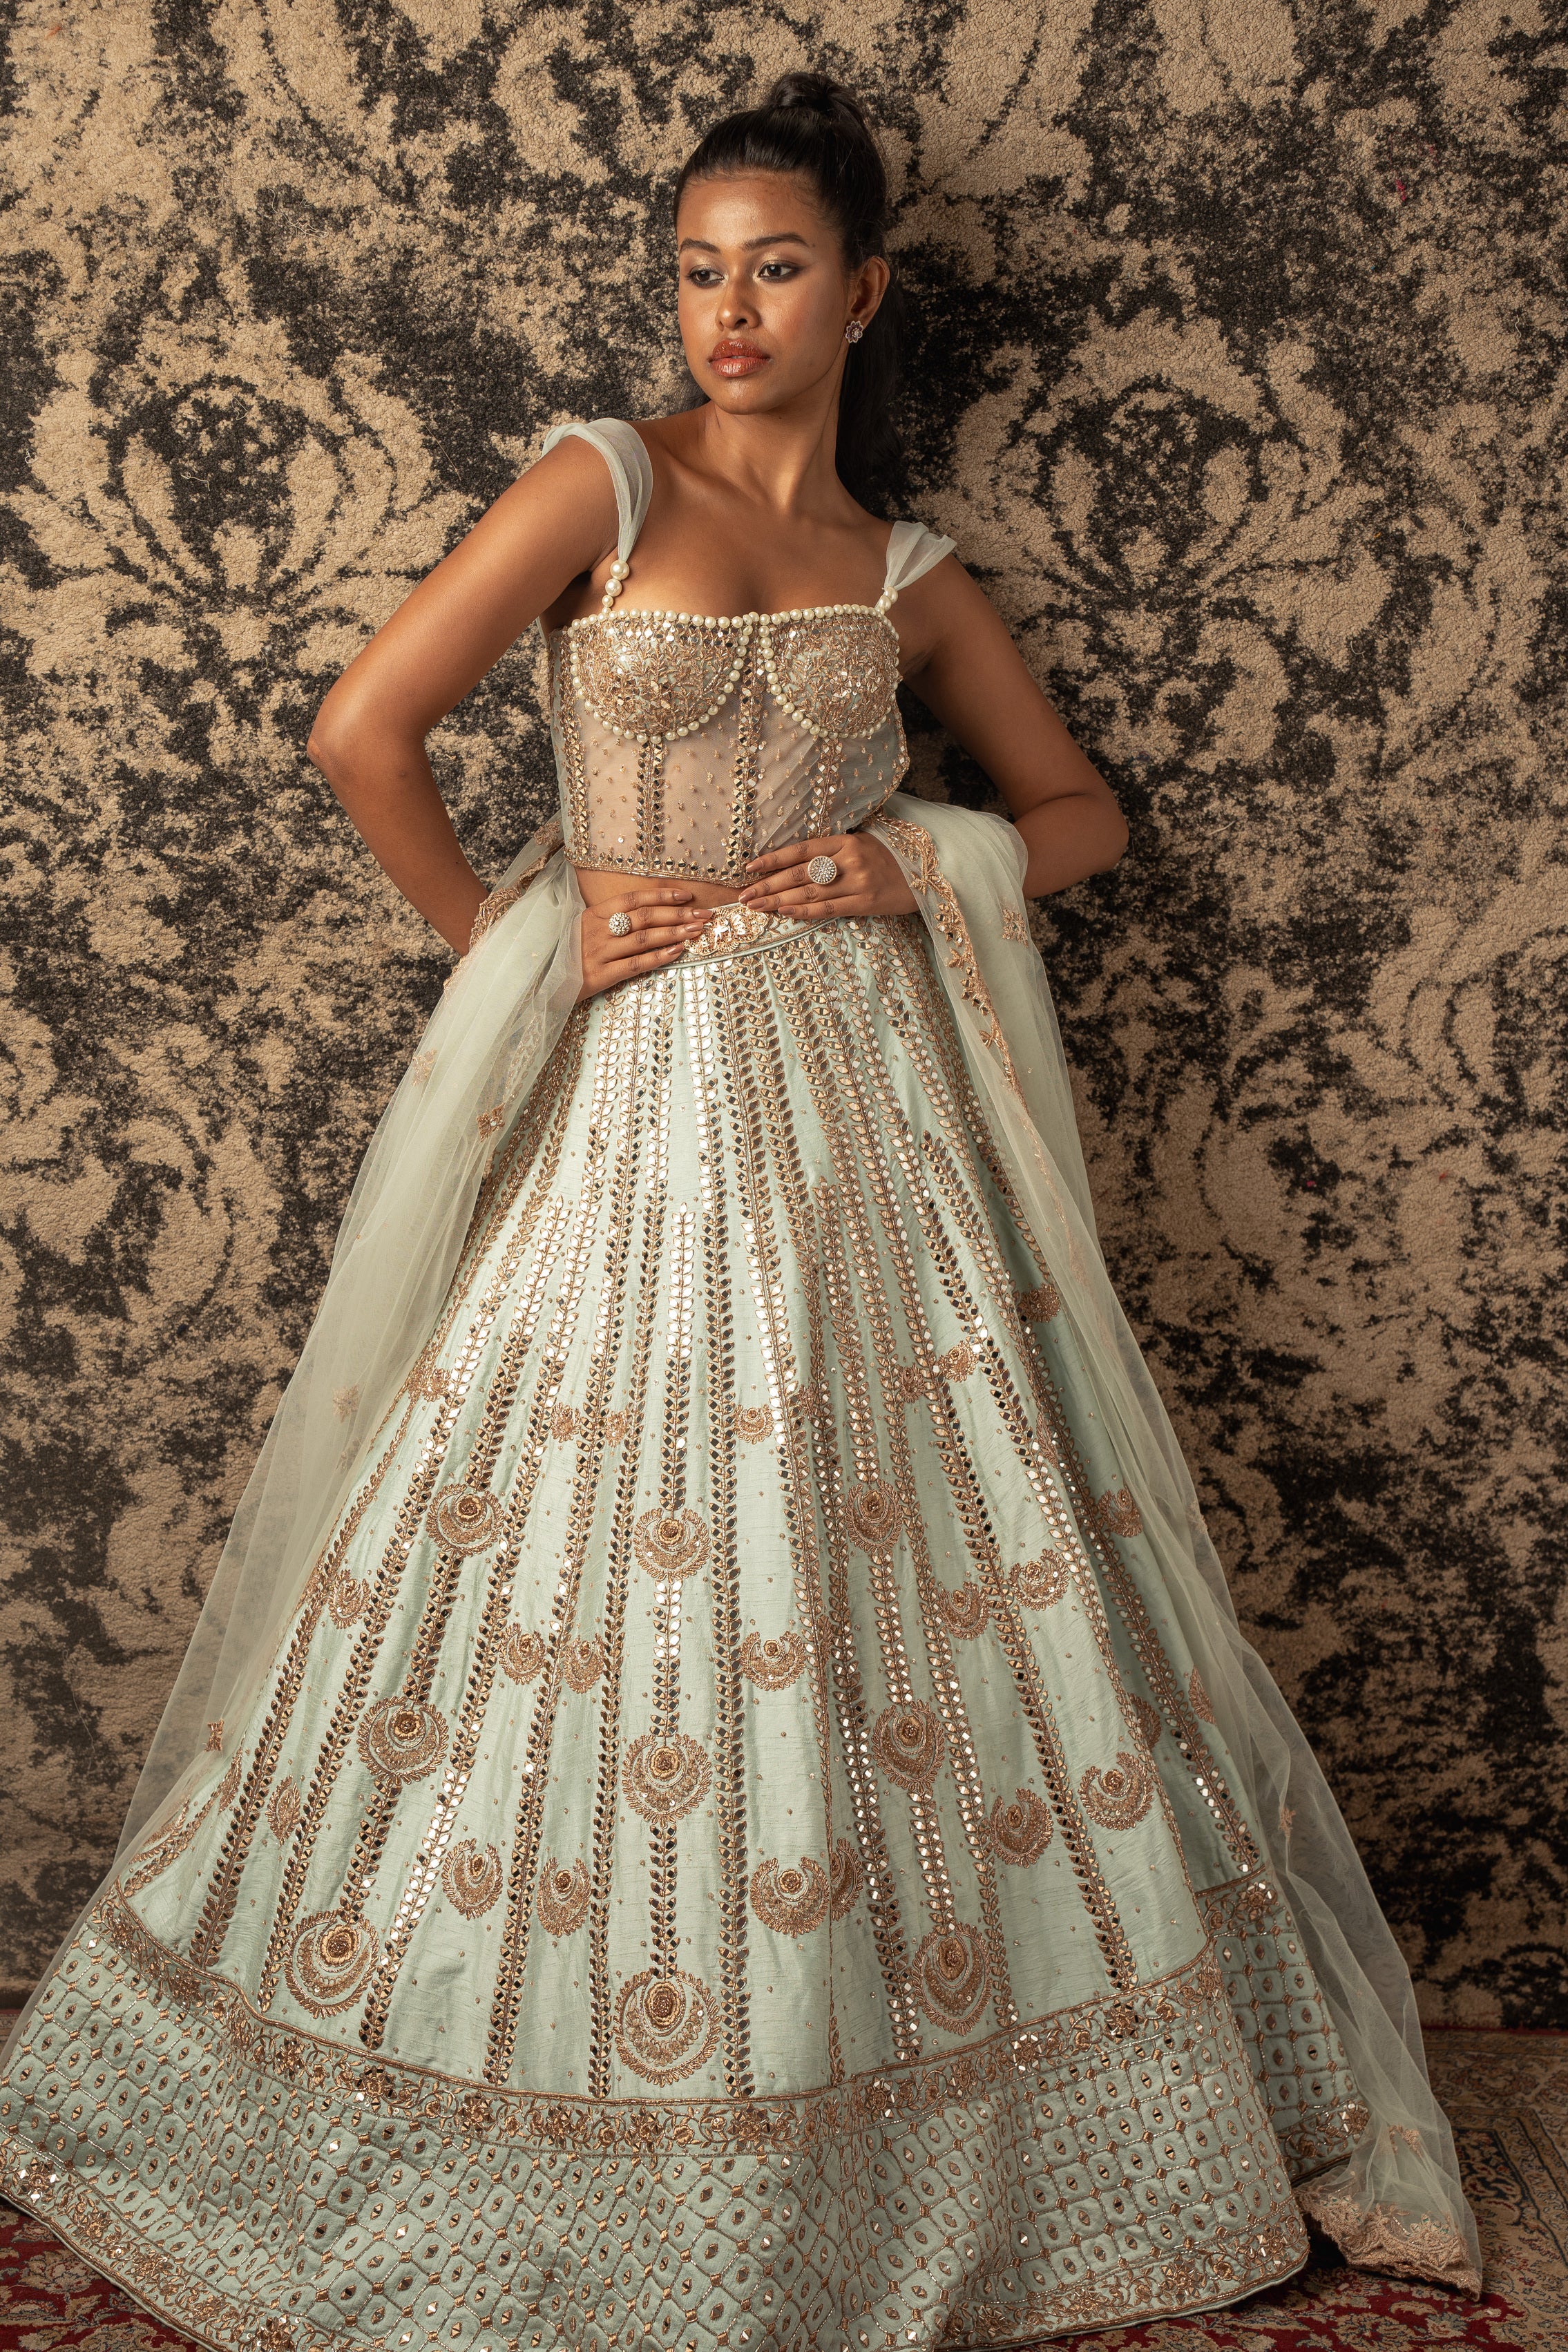 Embrace the freshness of Mint Green: Raw silk Lehenga paired with a delicate Net and Raw Silk blouse, adorned with a sheer Net Dupatta, a divine ensemble for any occasion.